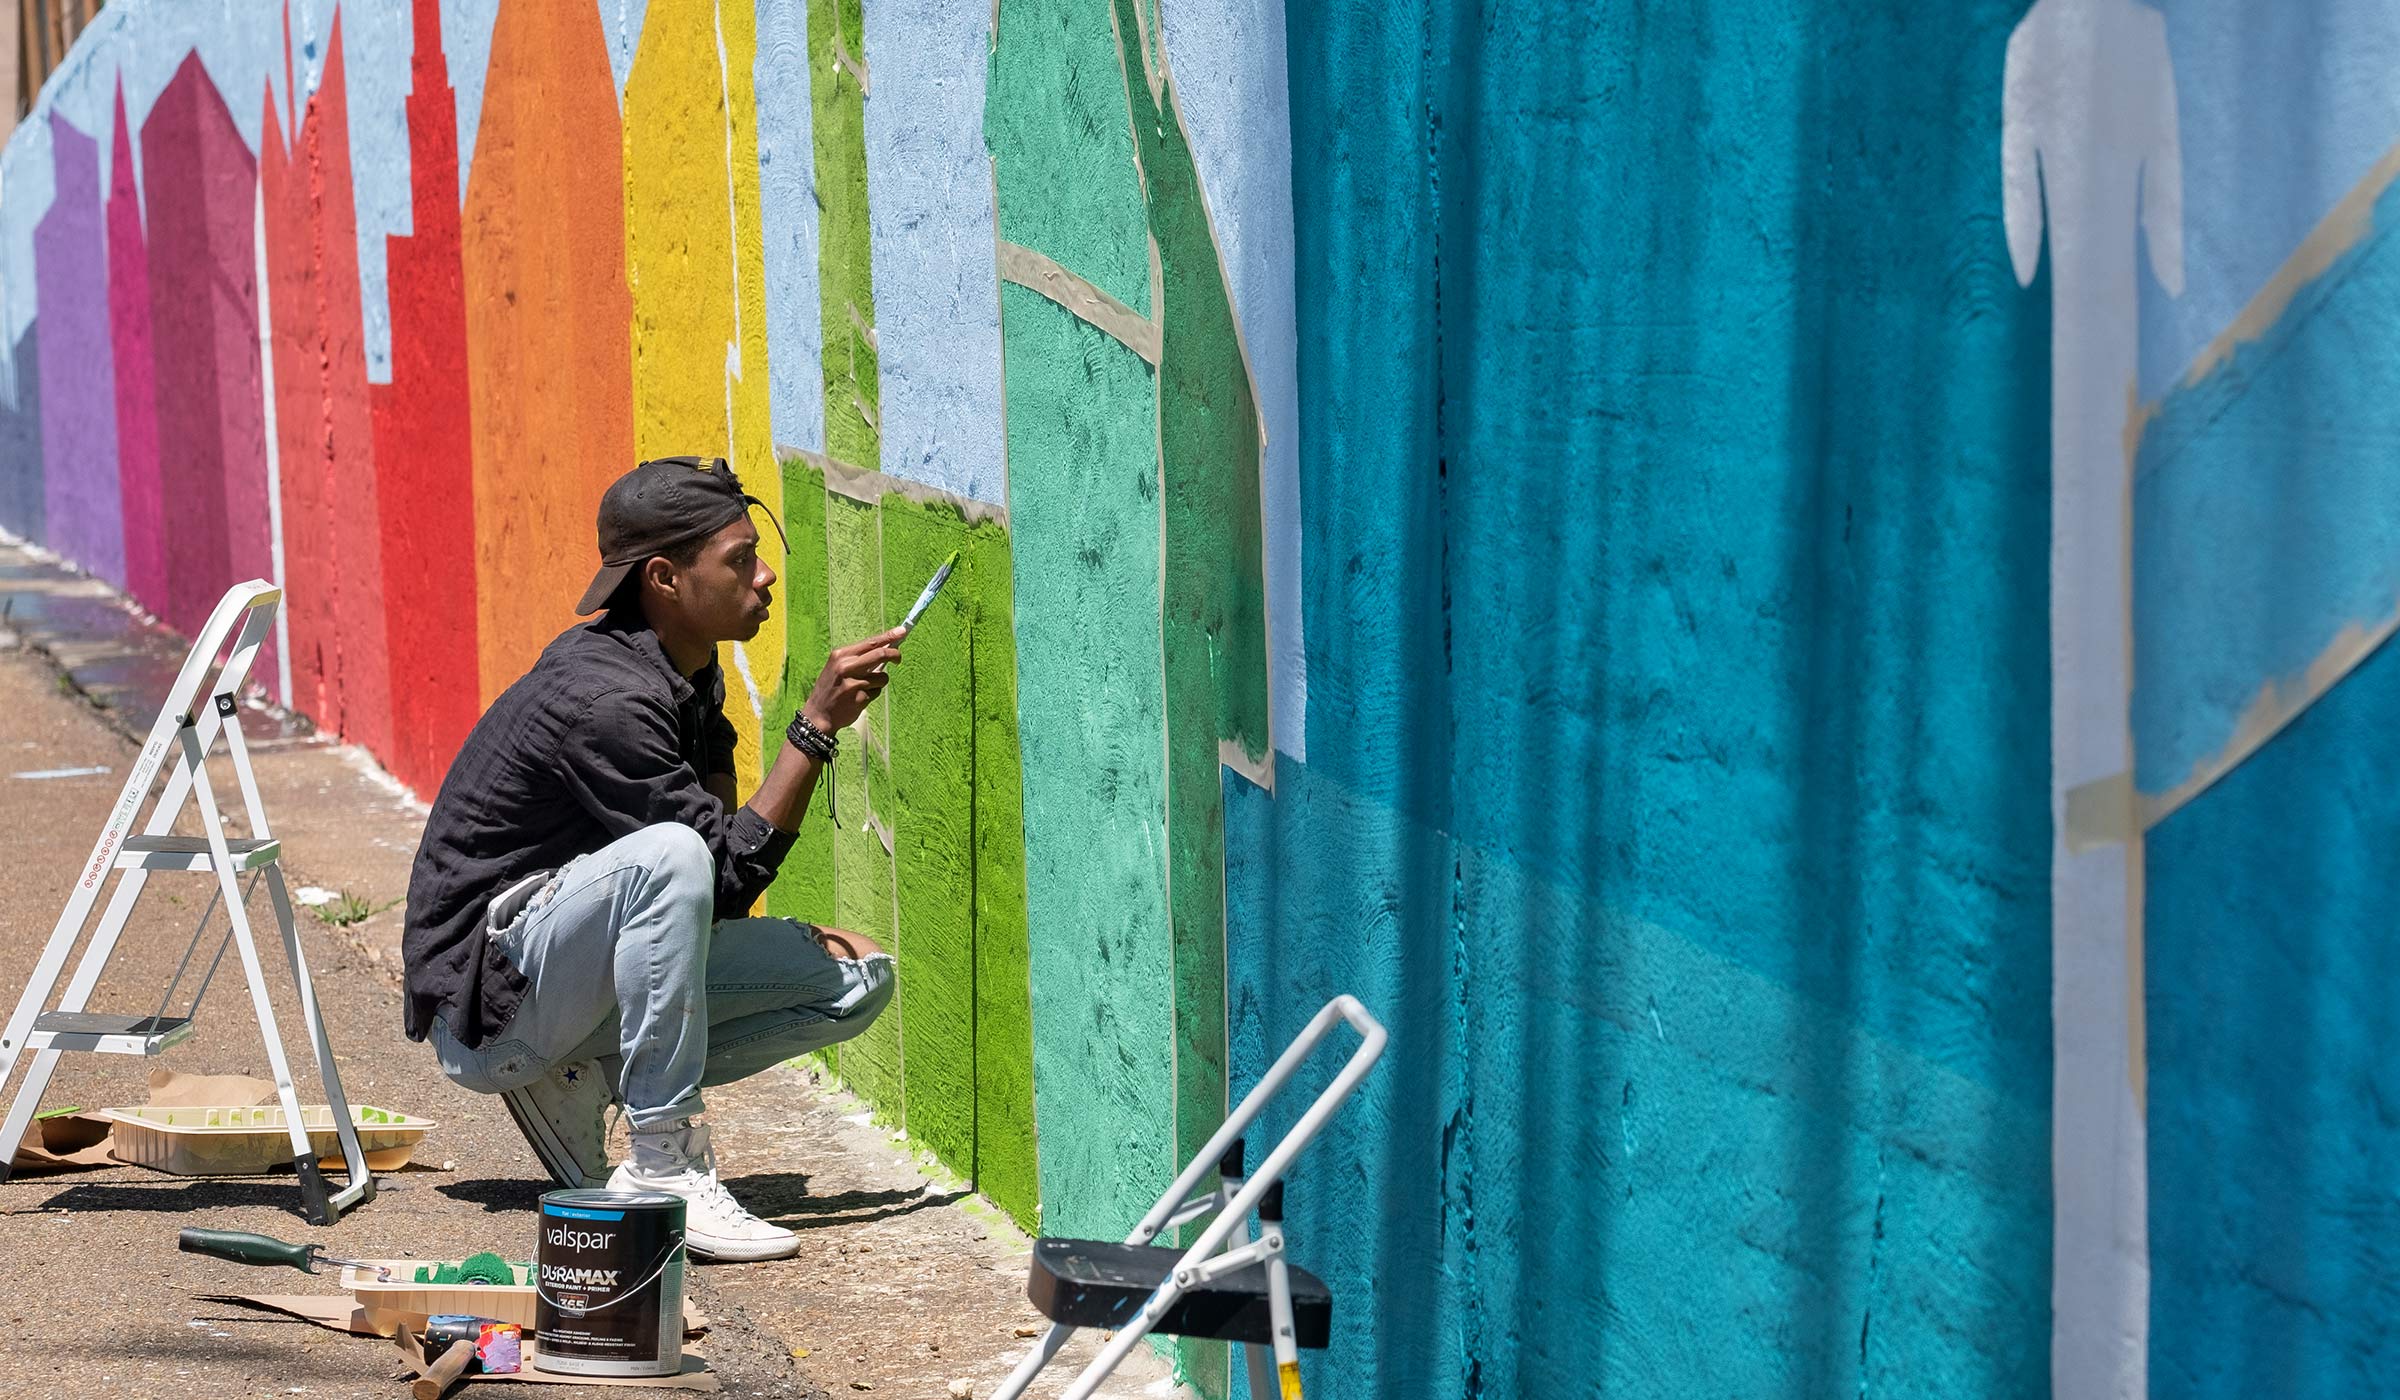 With the rainbow colors of buildings shapes painted on the wall mural to either side, a student uses a roller to apply green paint to his section.